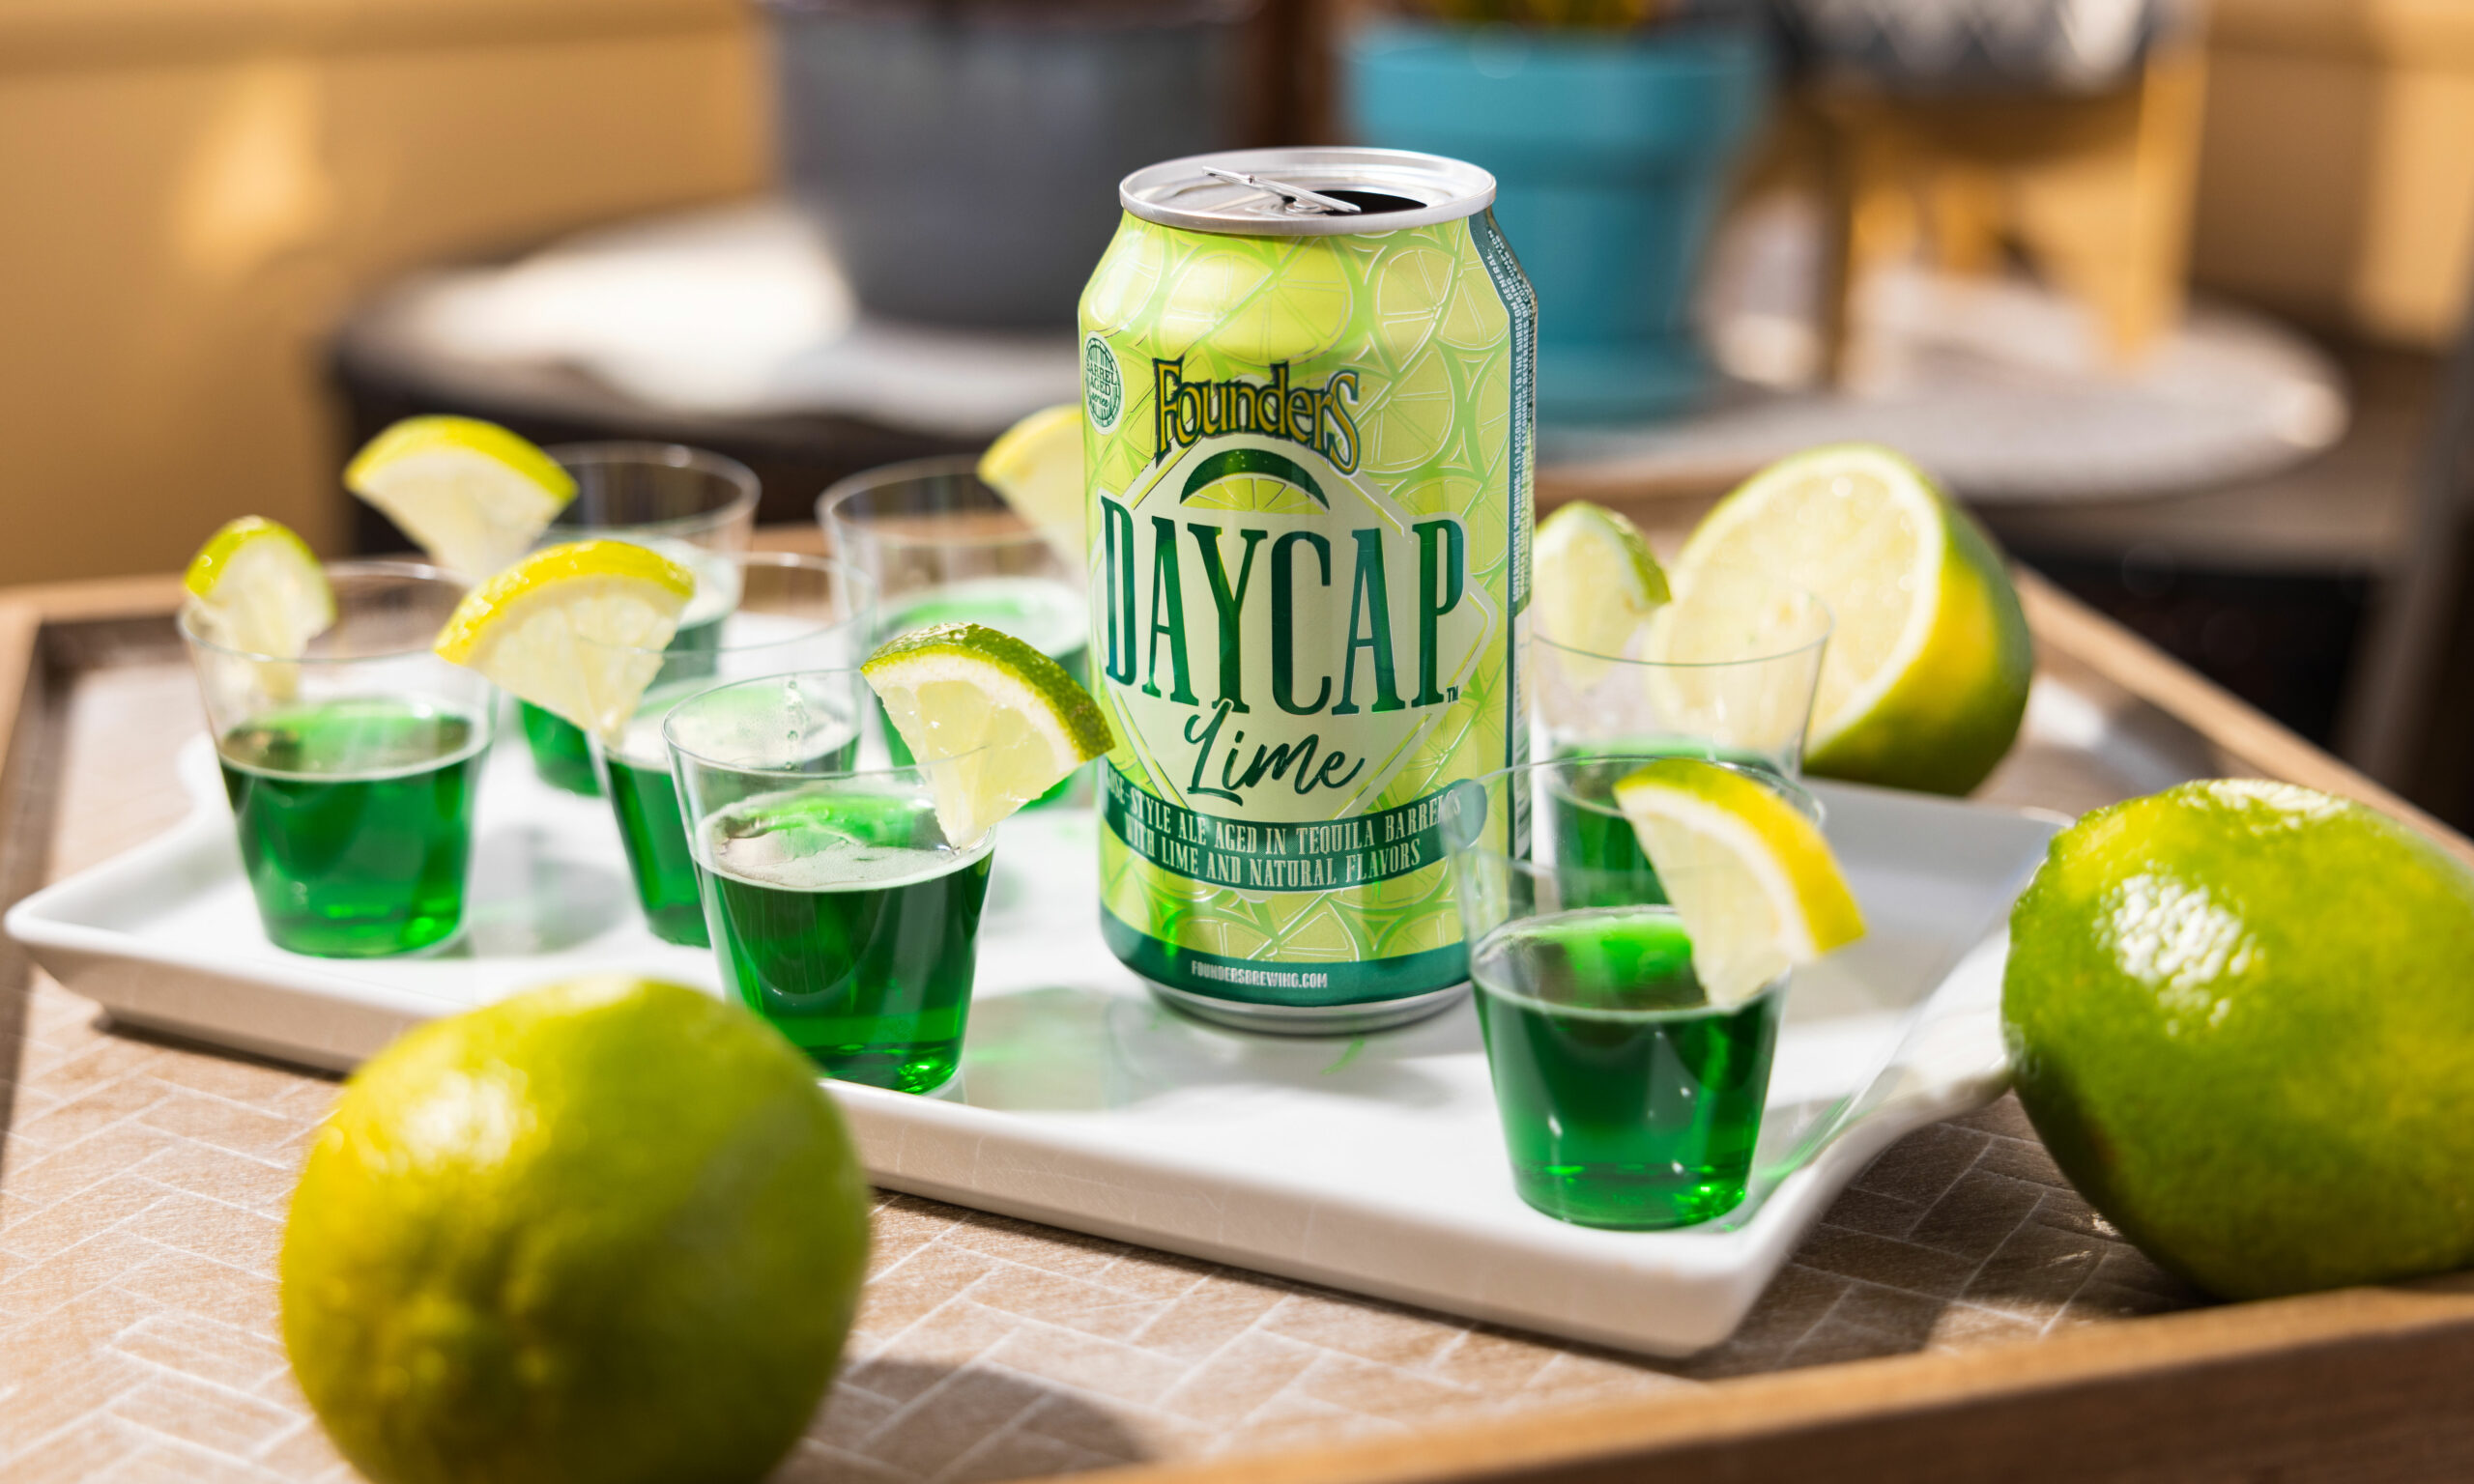 Daycap lime can with Jell-O Shots